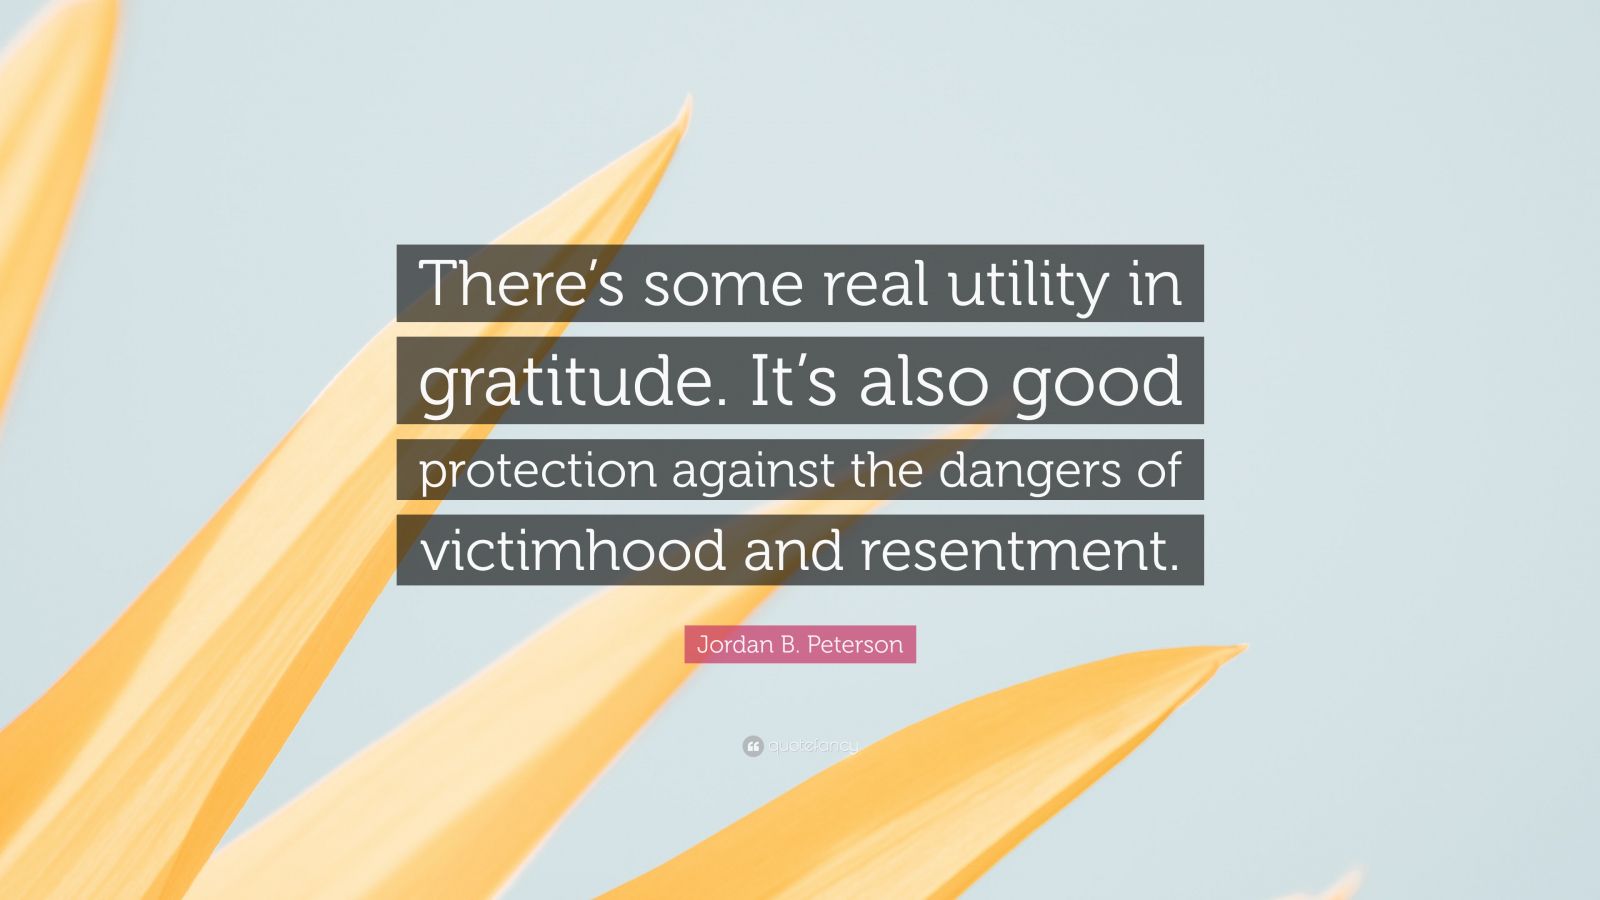 Jordan B. Peterson “There's some real utility in gratitude. It's also good protection against the dangers of victimhood and resentment.”